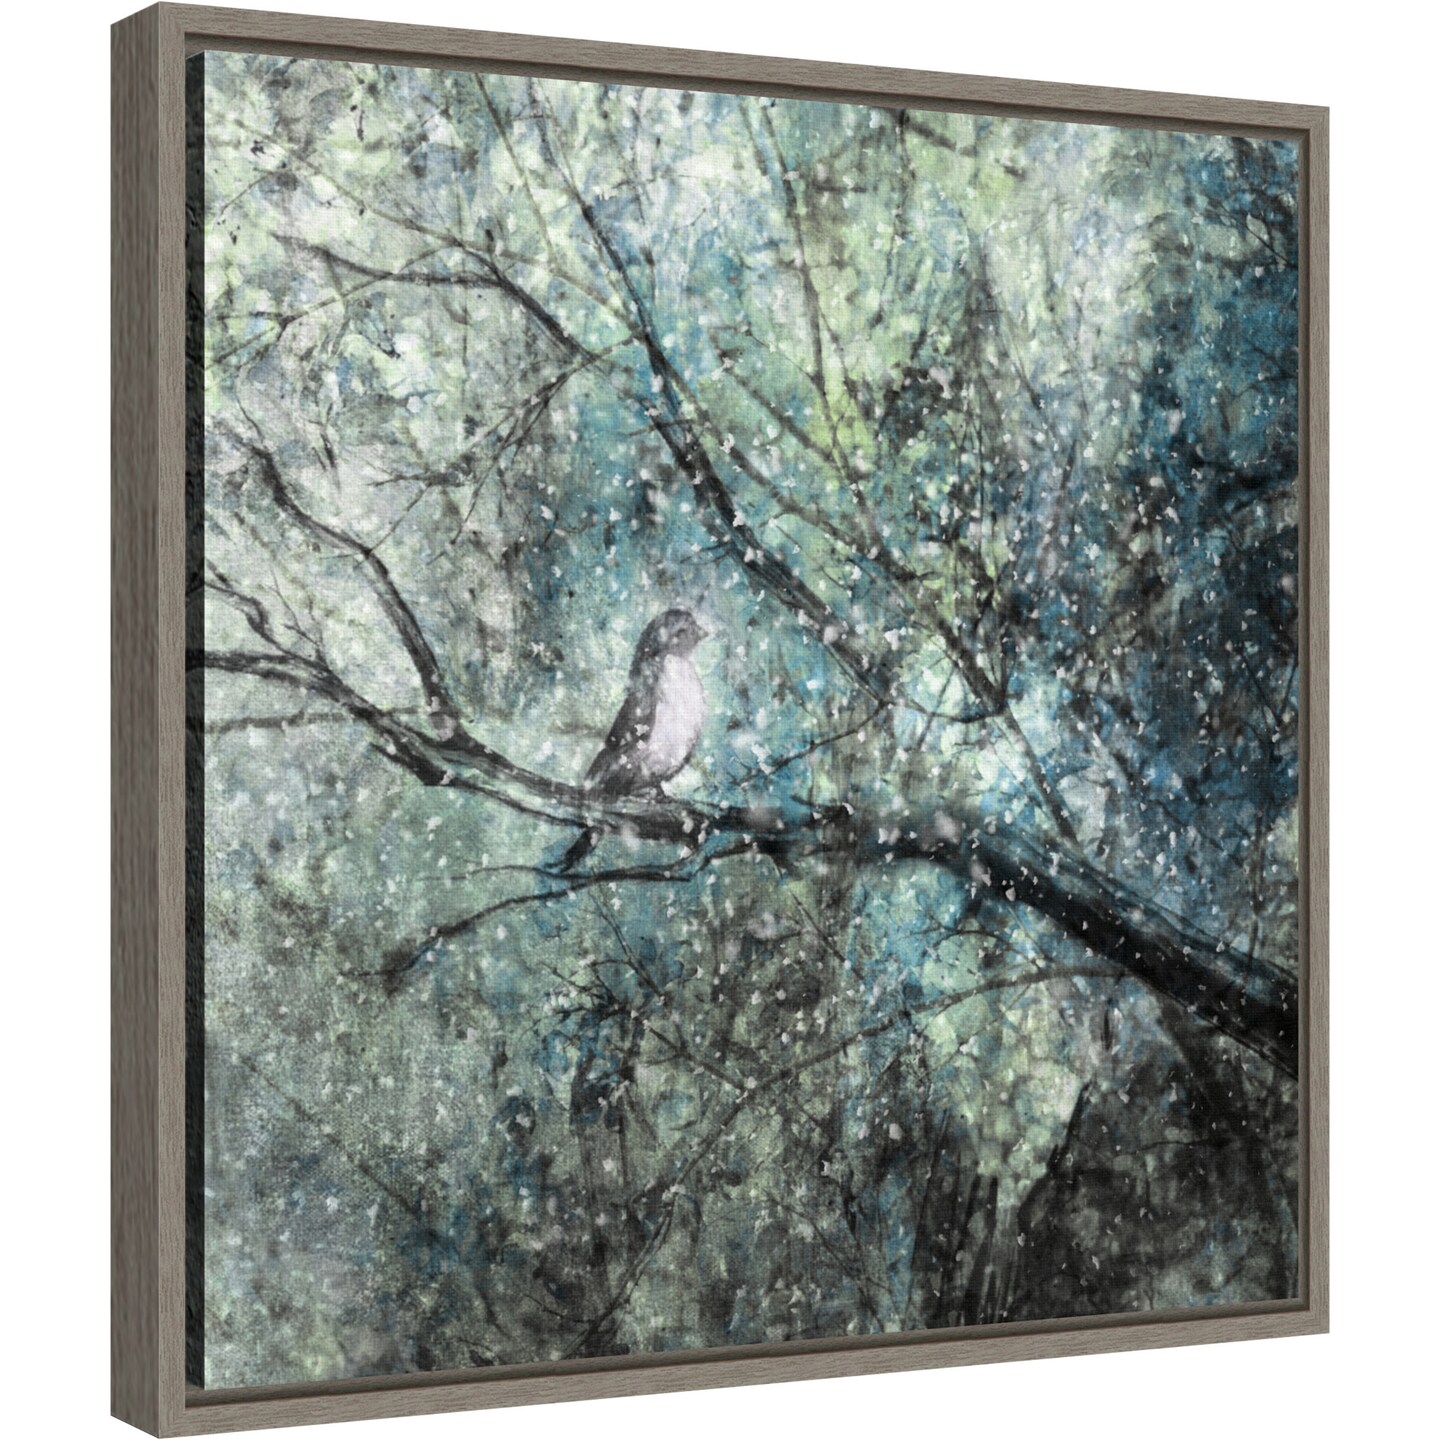 The Silence Of The Snow (Bird in Tree) by Delphine Devos 16-in. W x 16-in. H. Canvas Wall Art Print Framed in Grey